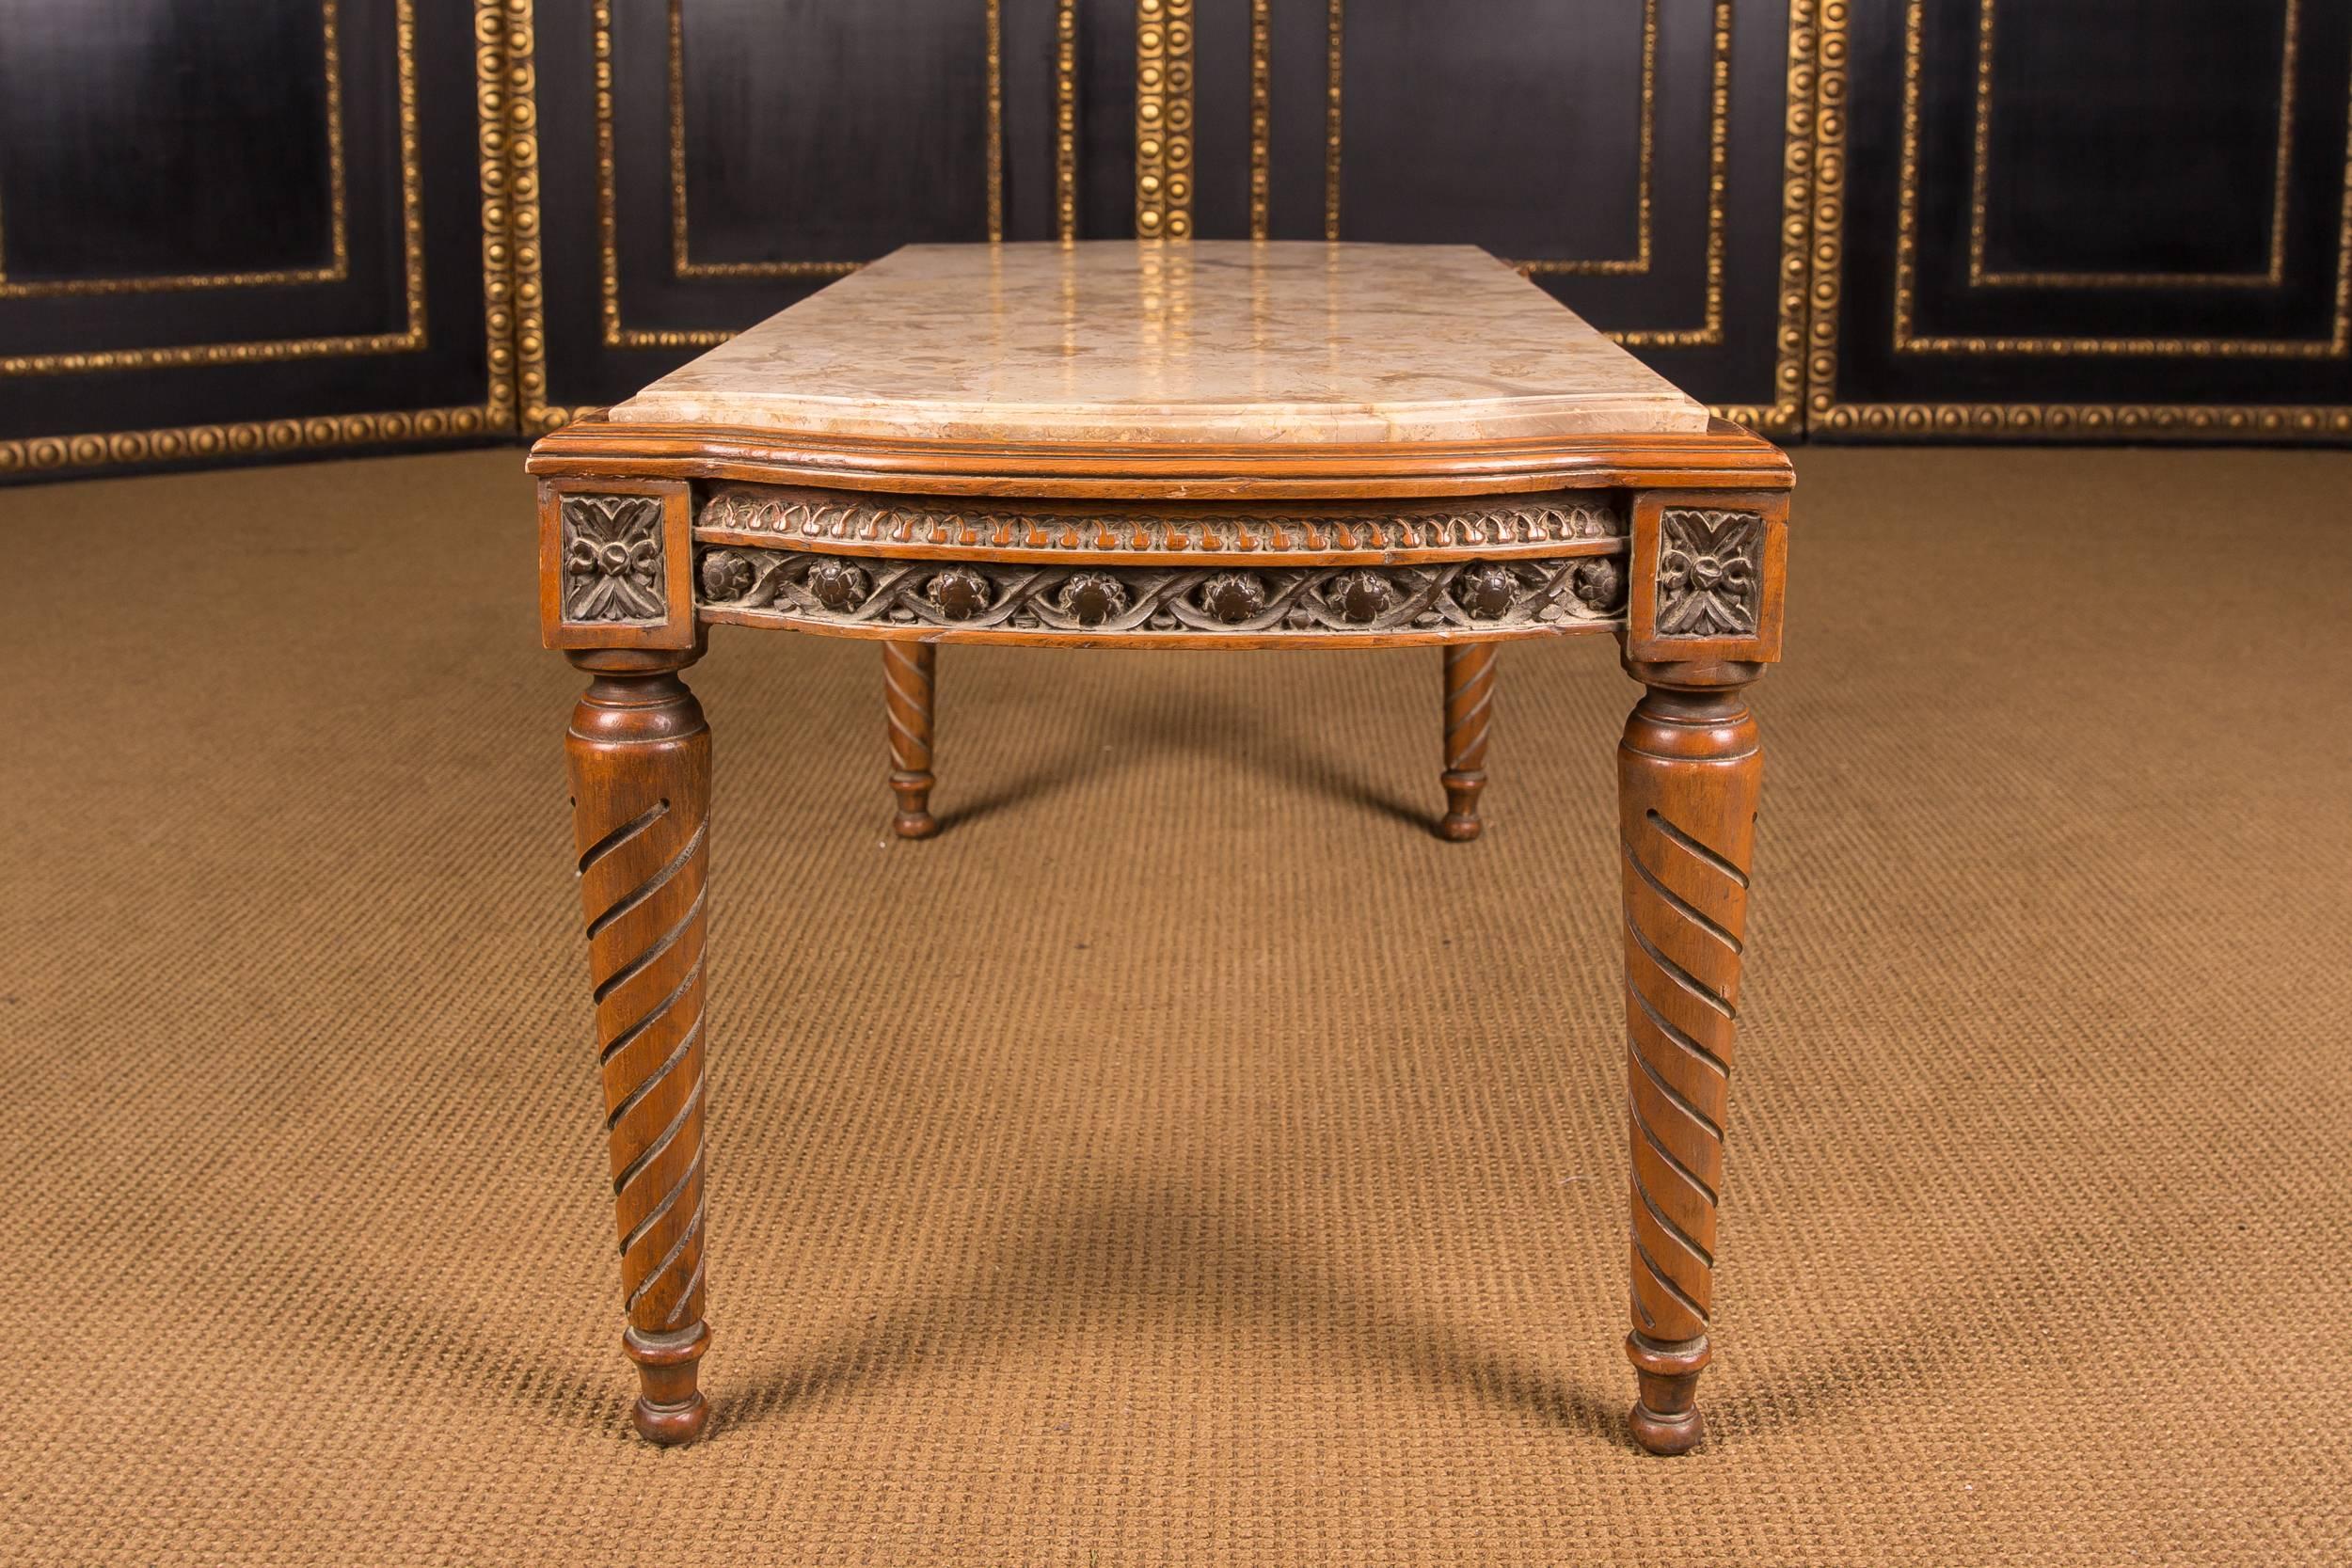 High Quality Table with Marble Top in Louis Seize Style (Handgeschnitzt)